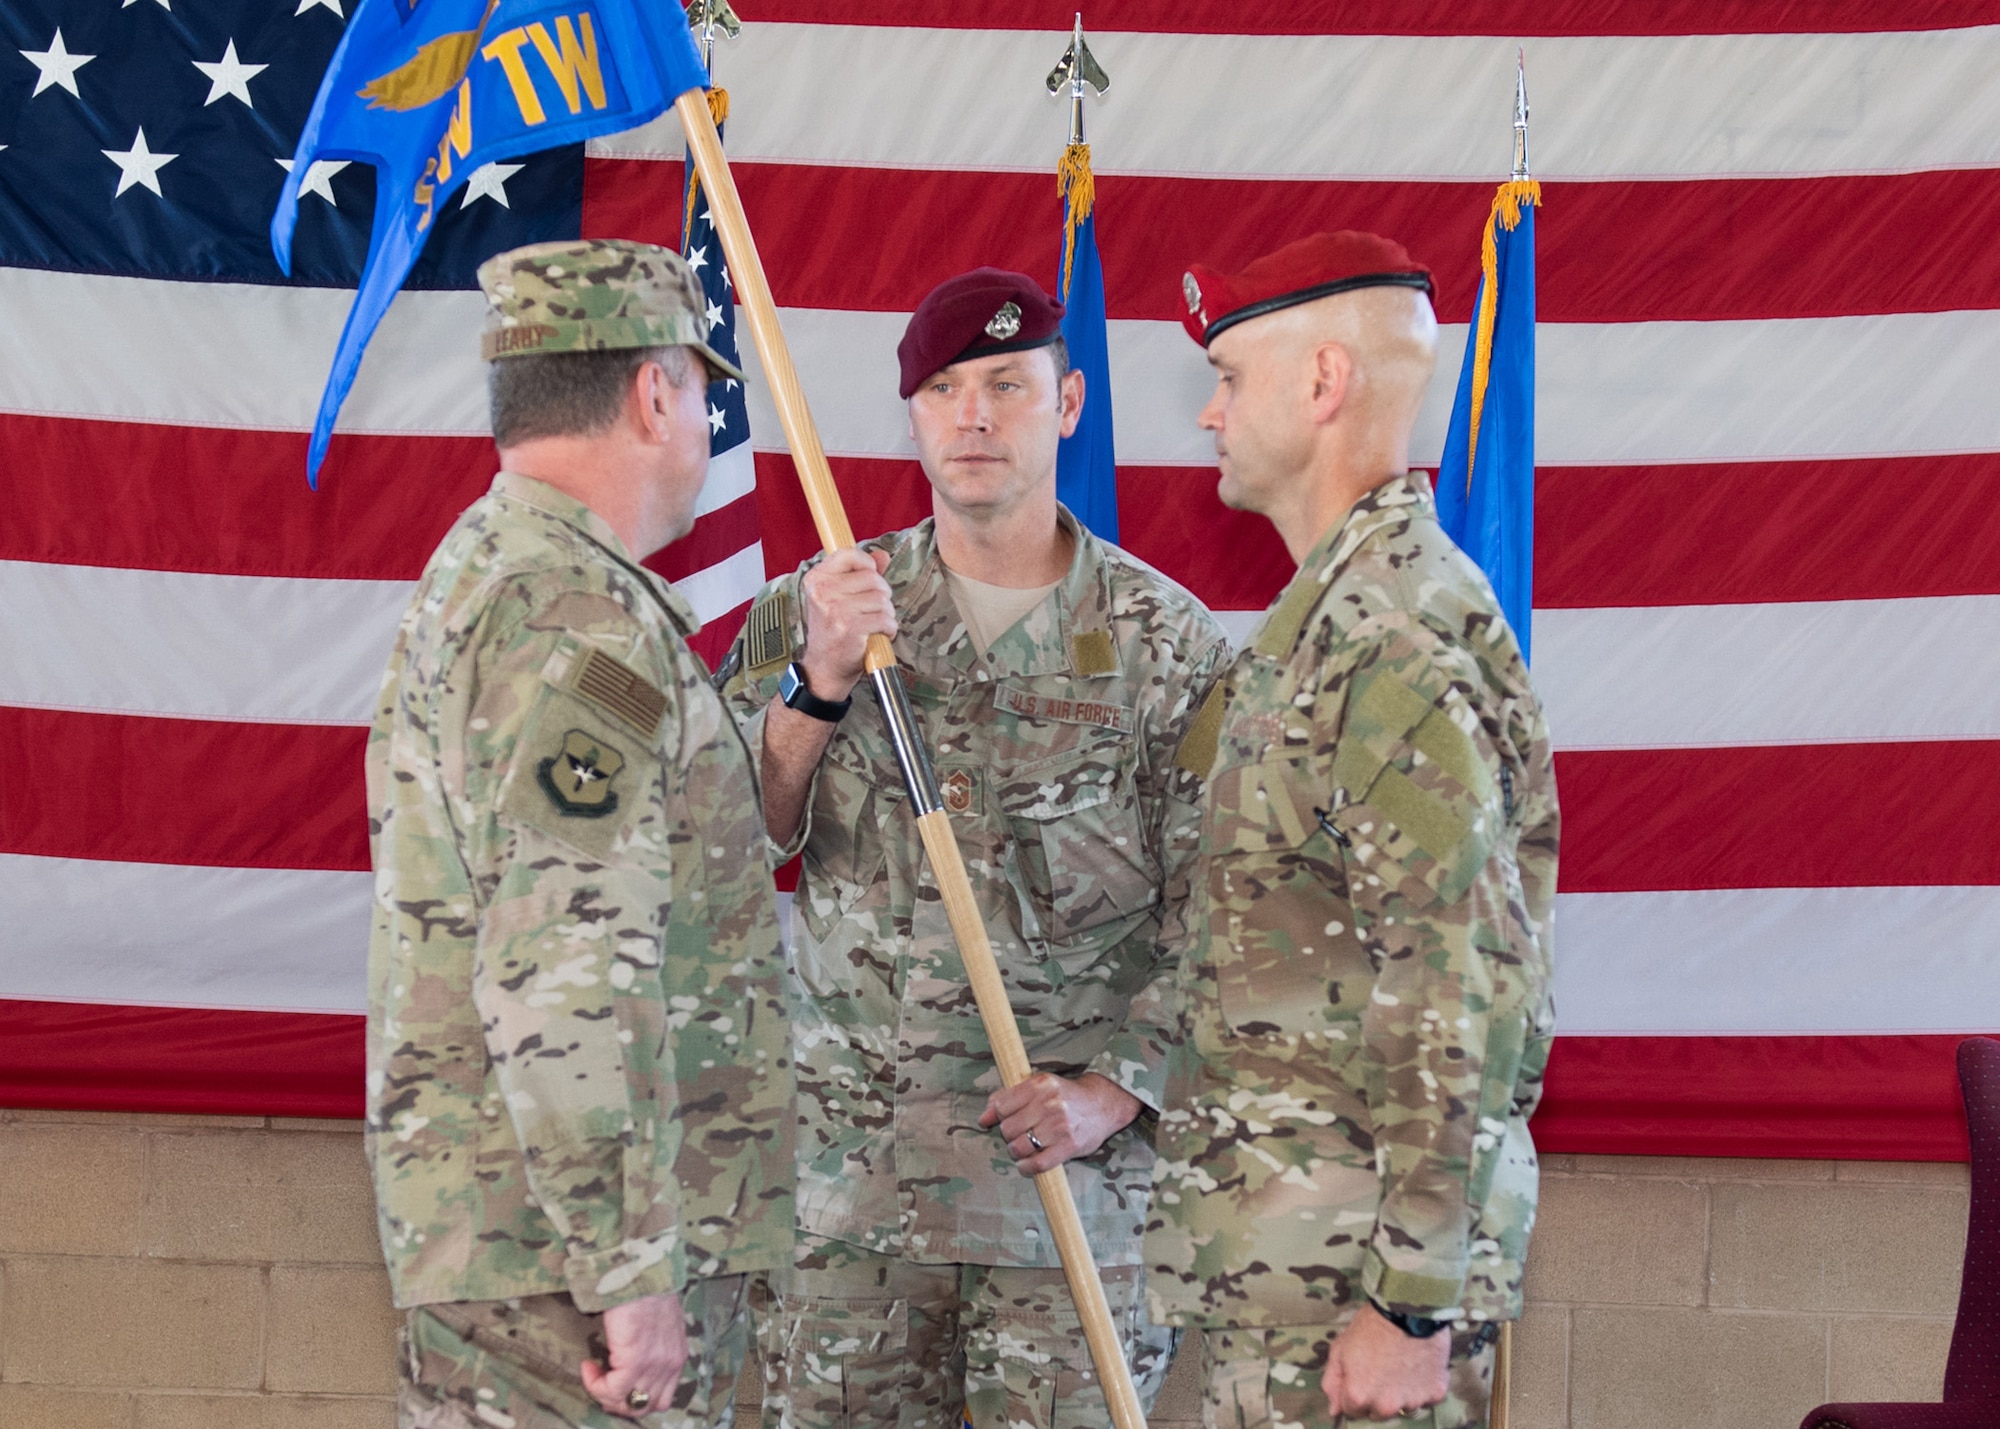 U.S. Air Force Maj. Gen. Timothy J. Leahy, Second Air Force, commander, 2nd Air Force Base, Mississippi gives command of the Special Warfare Training Wing (SWTW), Joint Base San Antonio-Medina Base, Texas to Col. James Hughes during the wing activation ceremony Oct. 10, 2018. The mission of the new wing is to select, train, equip, and mentor Airmen to conduct global combat operations in contested, denied, operationally limited, and permissive environments under any environmental conditions. (U.S. Air Force photo by Andrew C. Patterson)